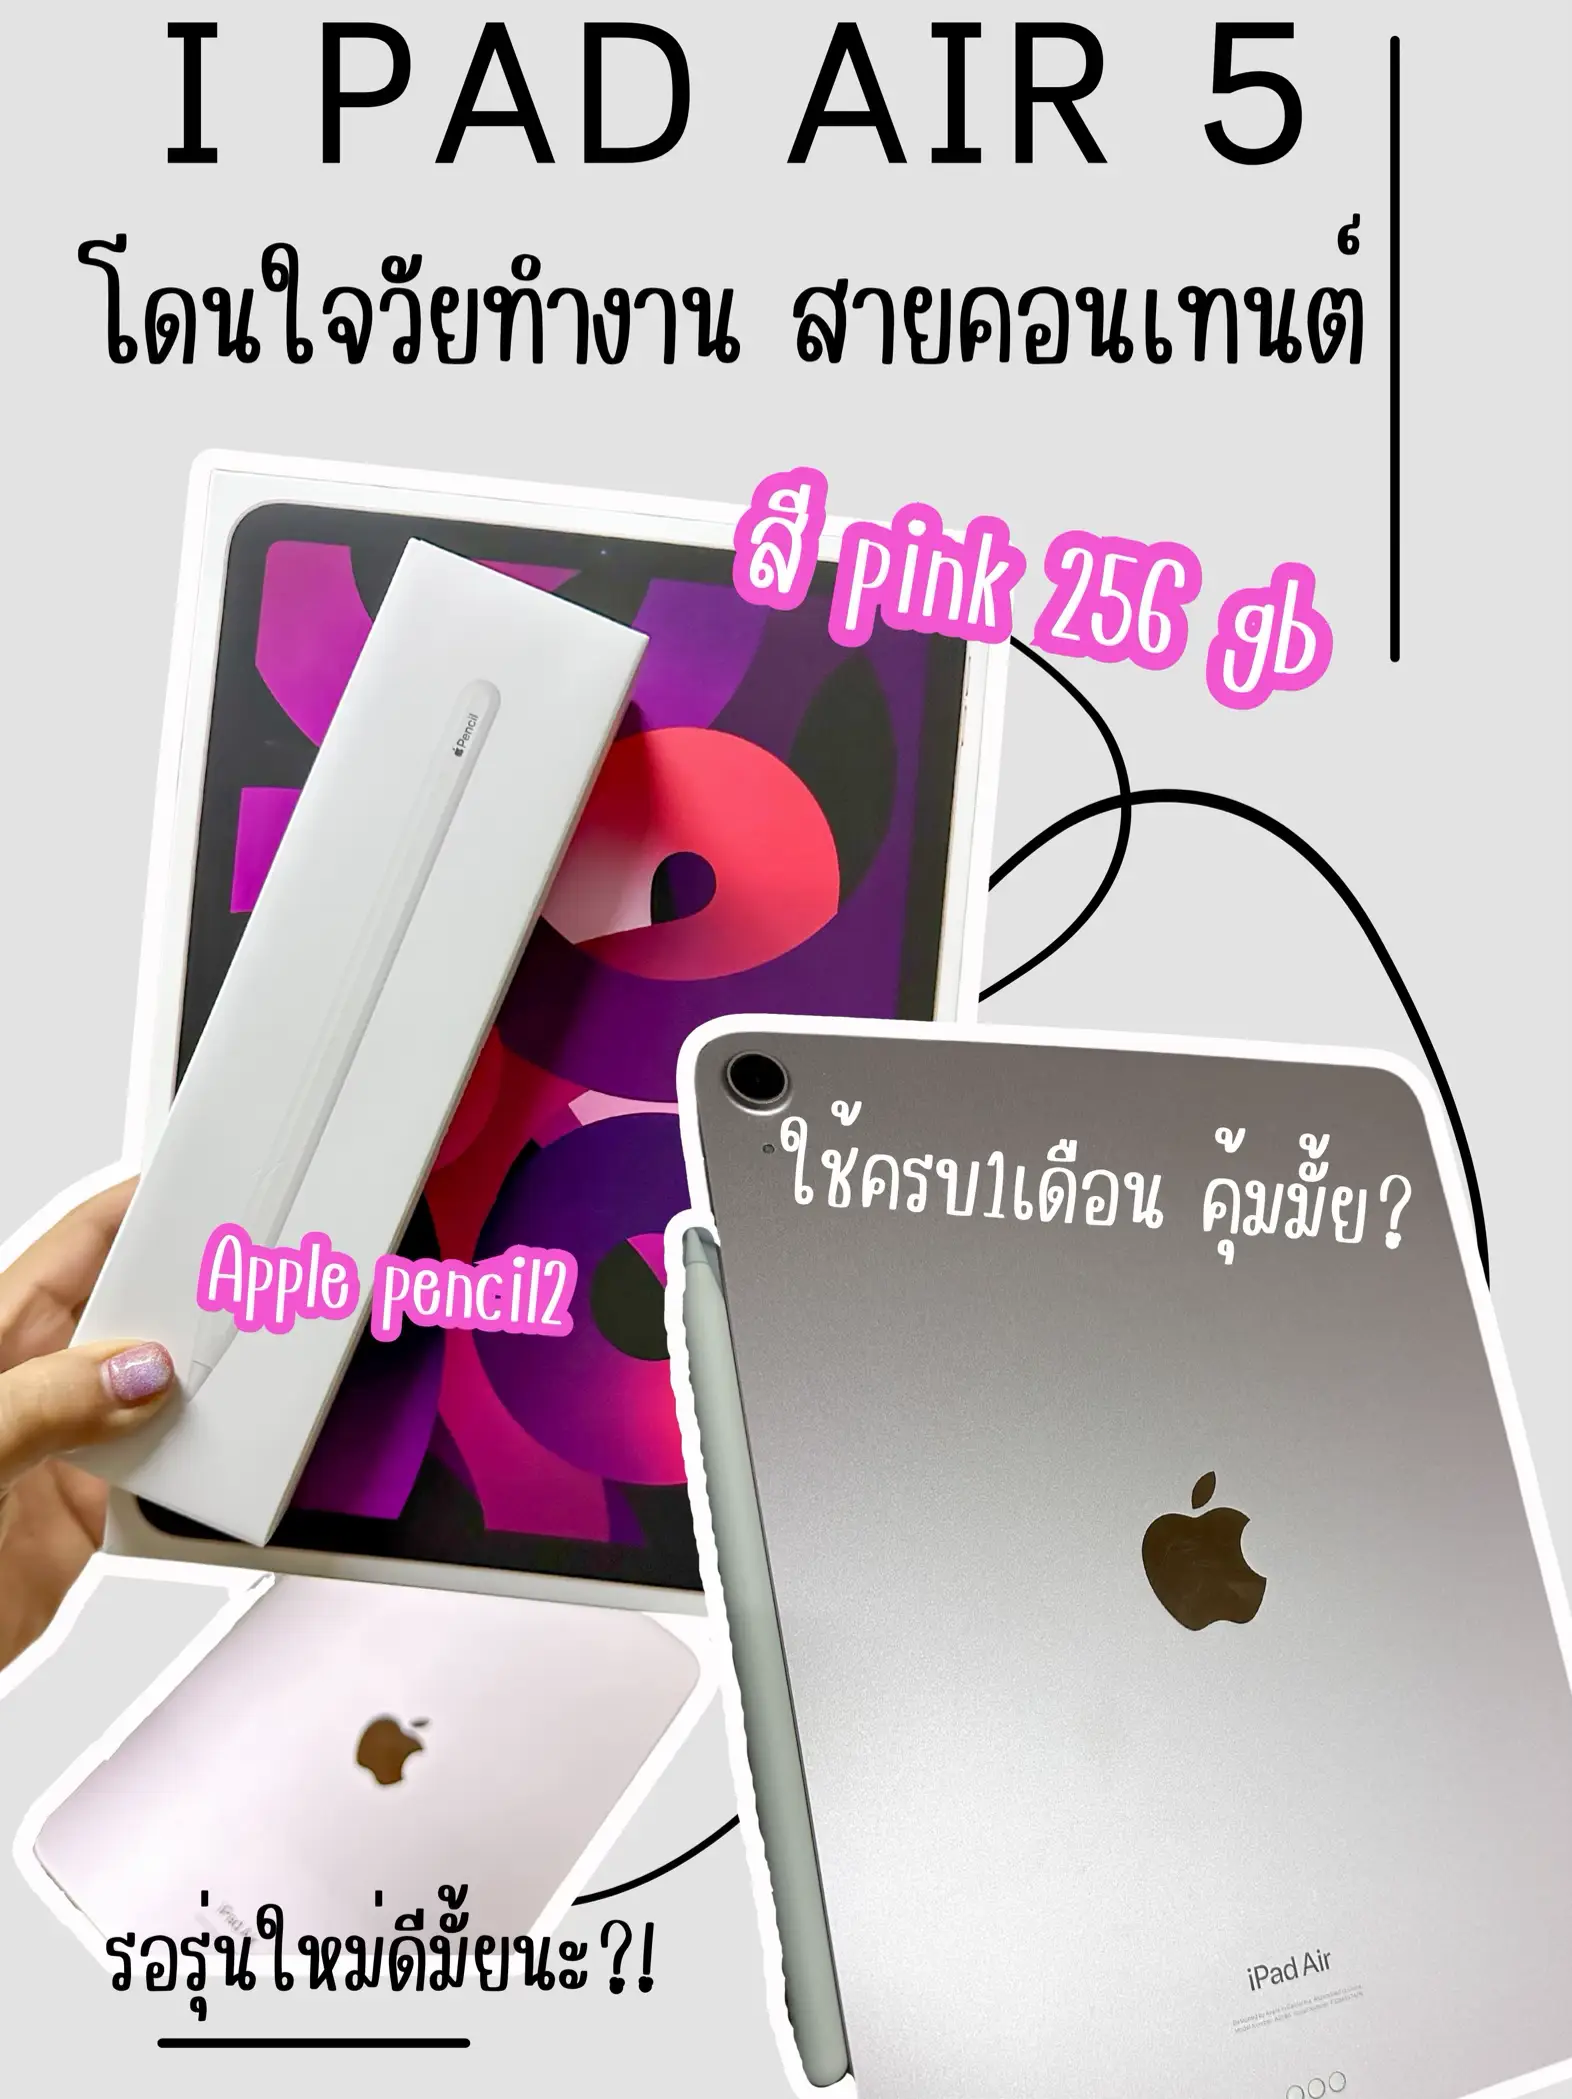 I Pad Air 5 256 GB (wifi) Pink 💕 | Gallery posted by เอะอะไป